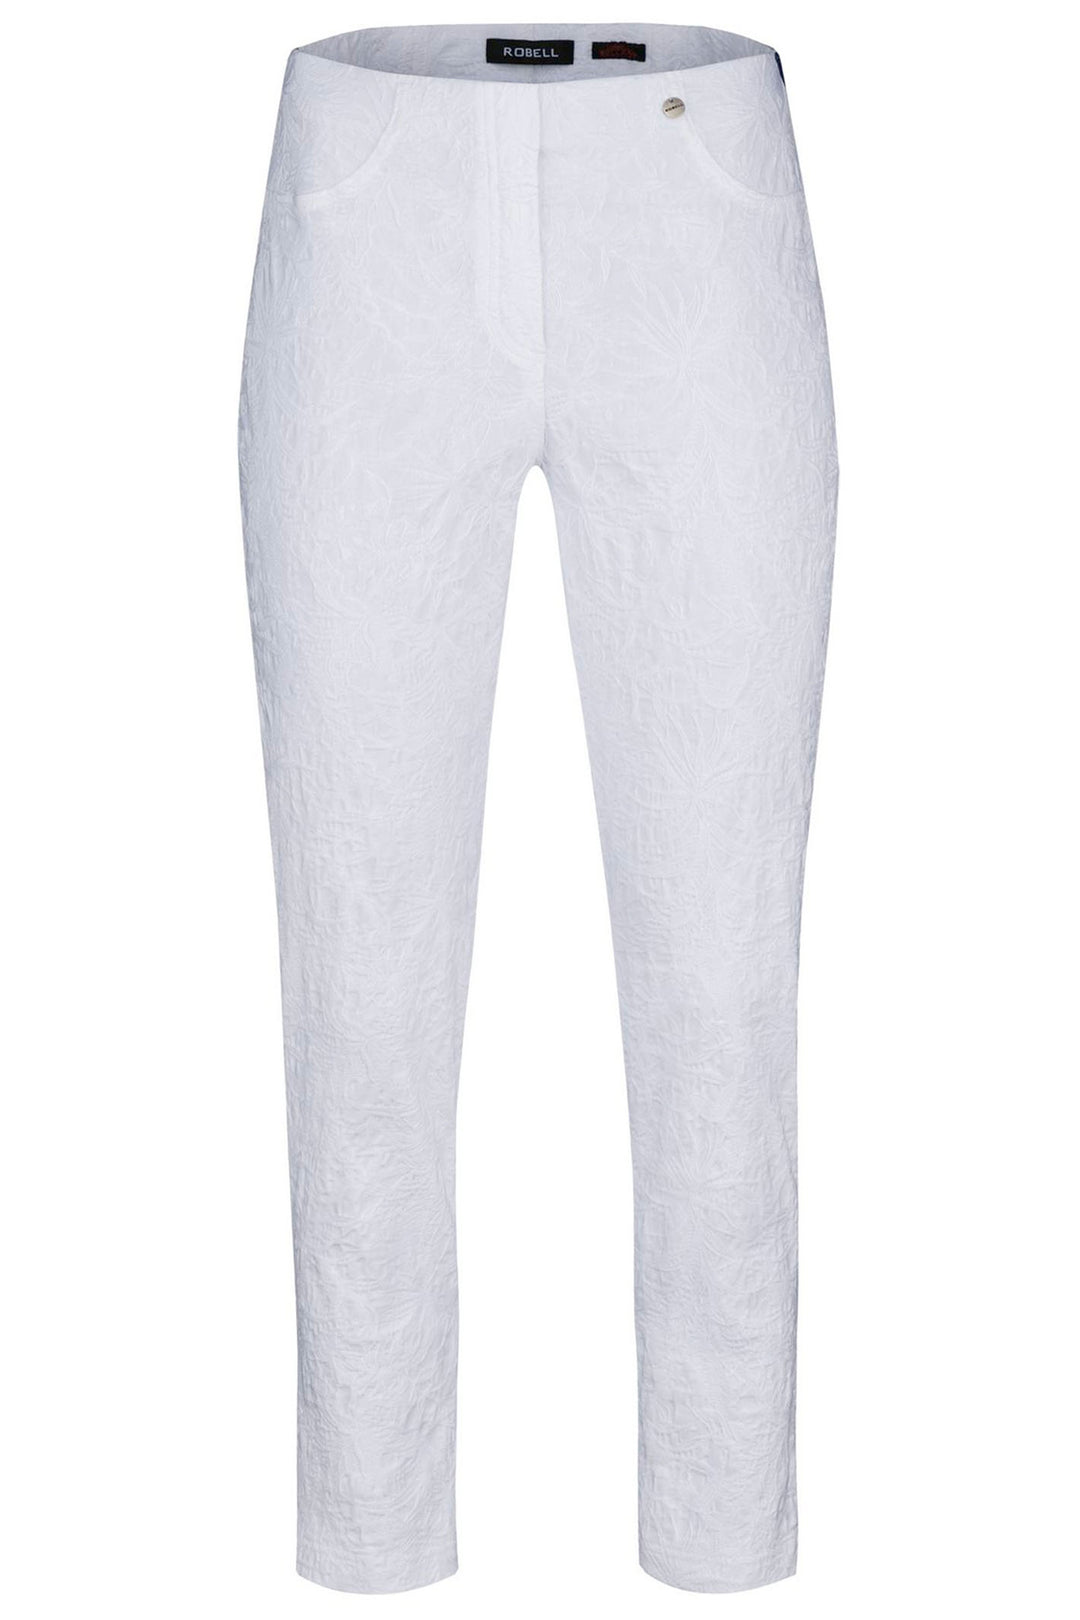 Robell Bella 09 51560 54401 Col 10 White Paisley Embossed Ankle Grazer Trousers 68cm - Dotique